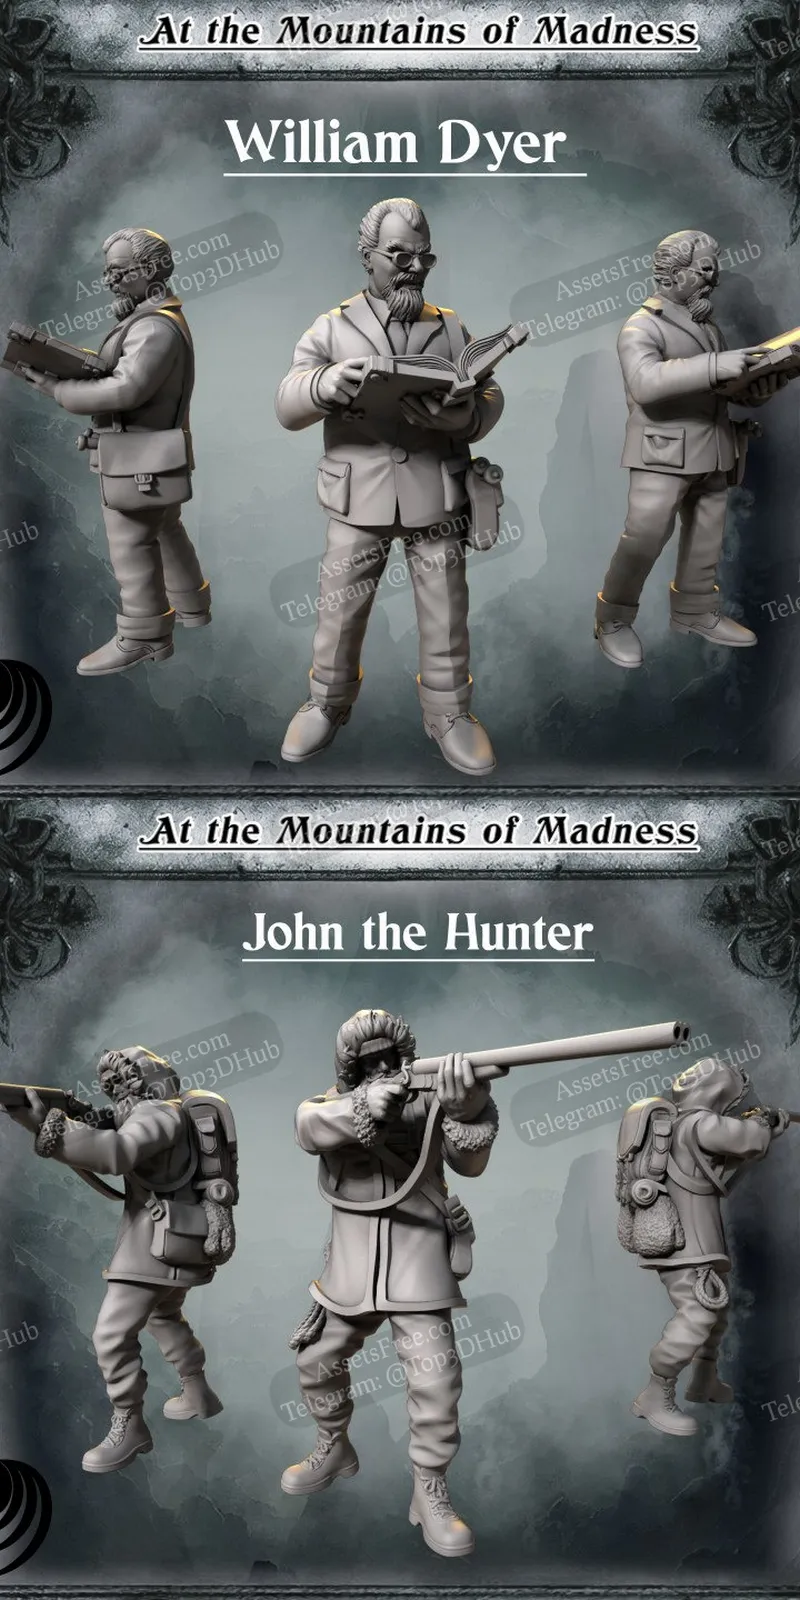 William Dyer and John the Hunter - At the Mountains of Madness